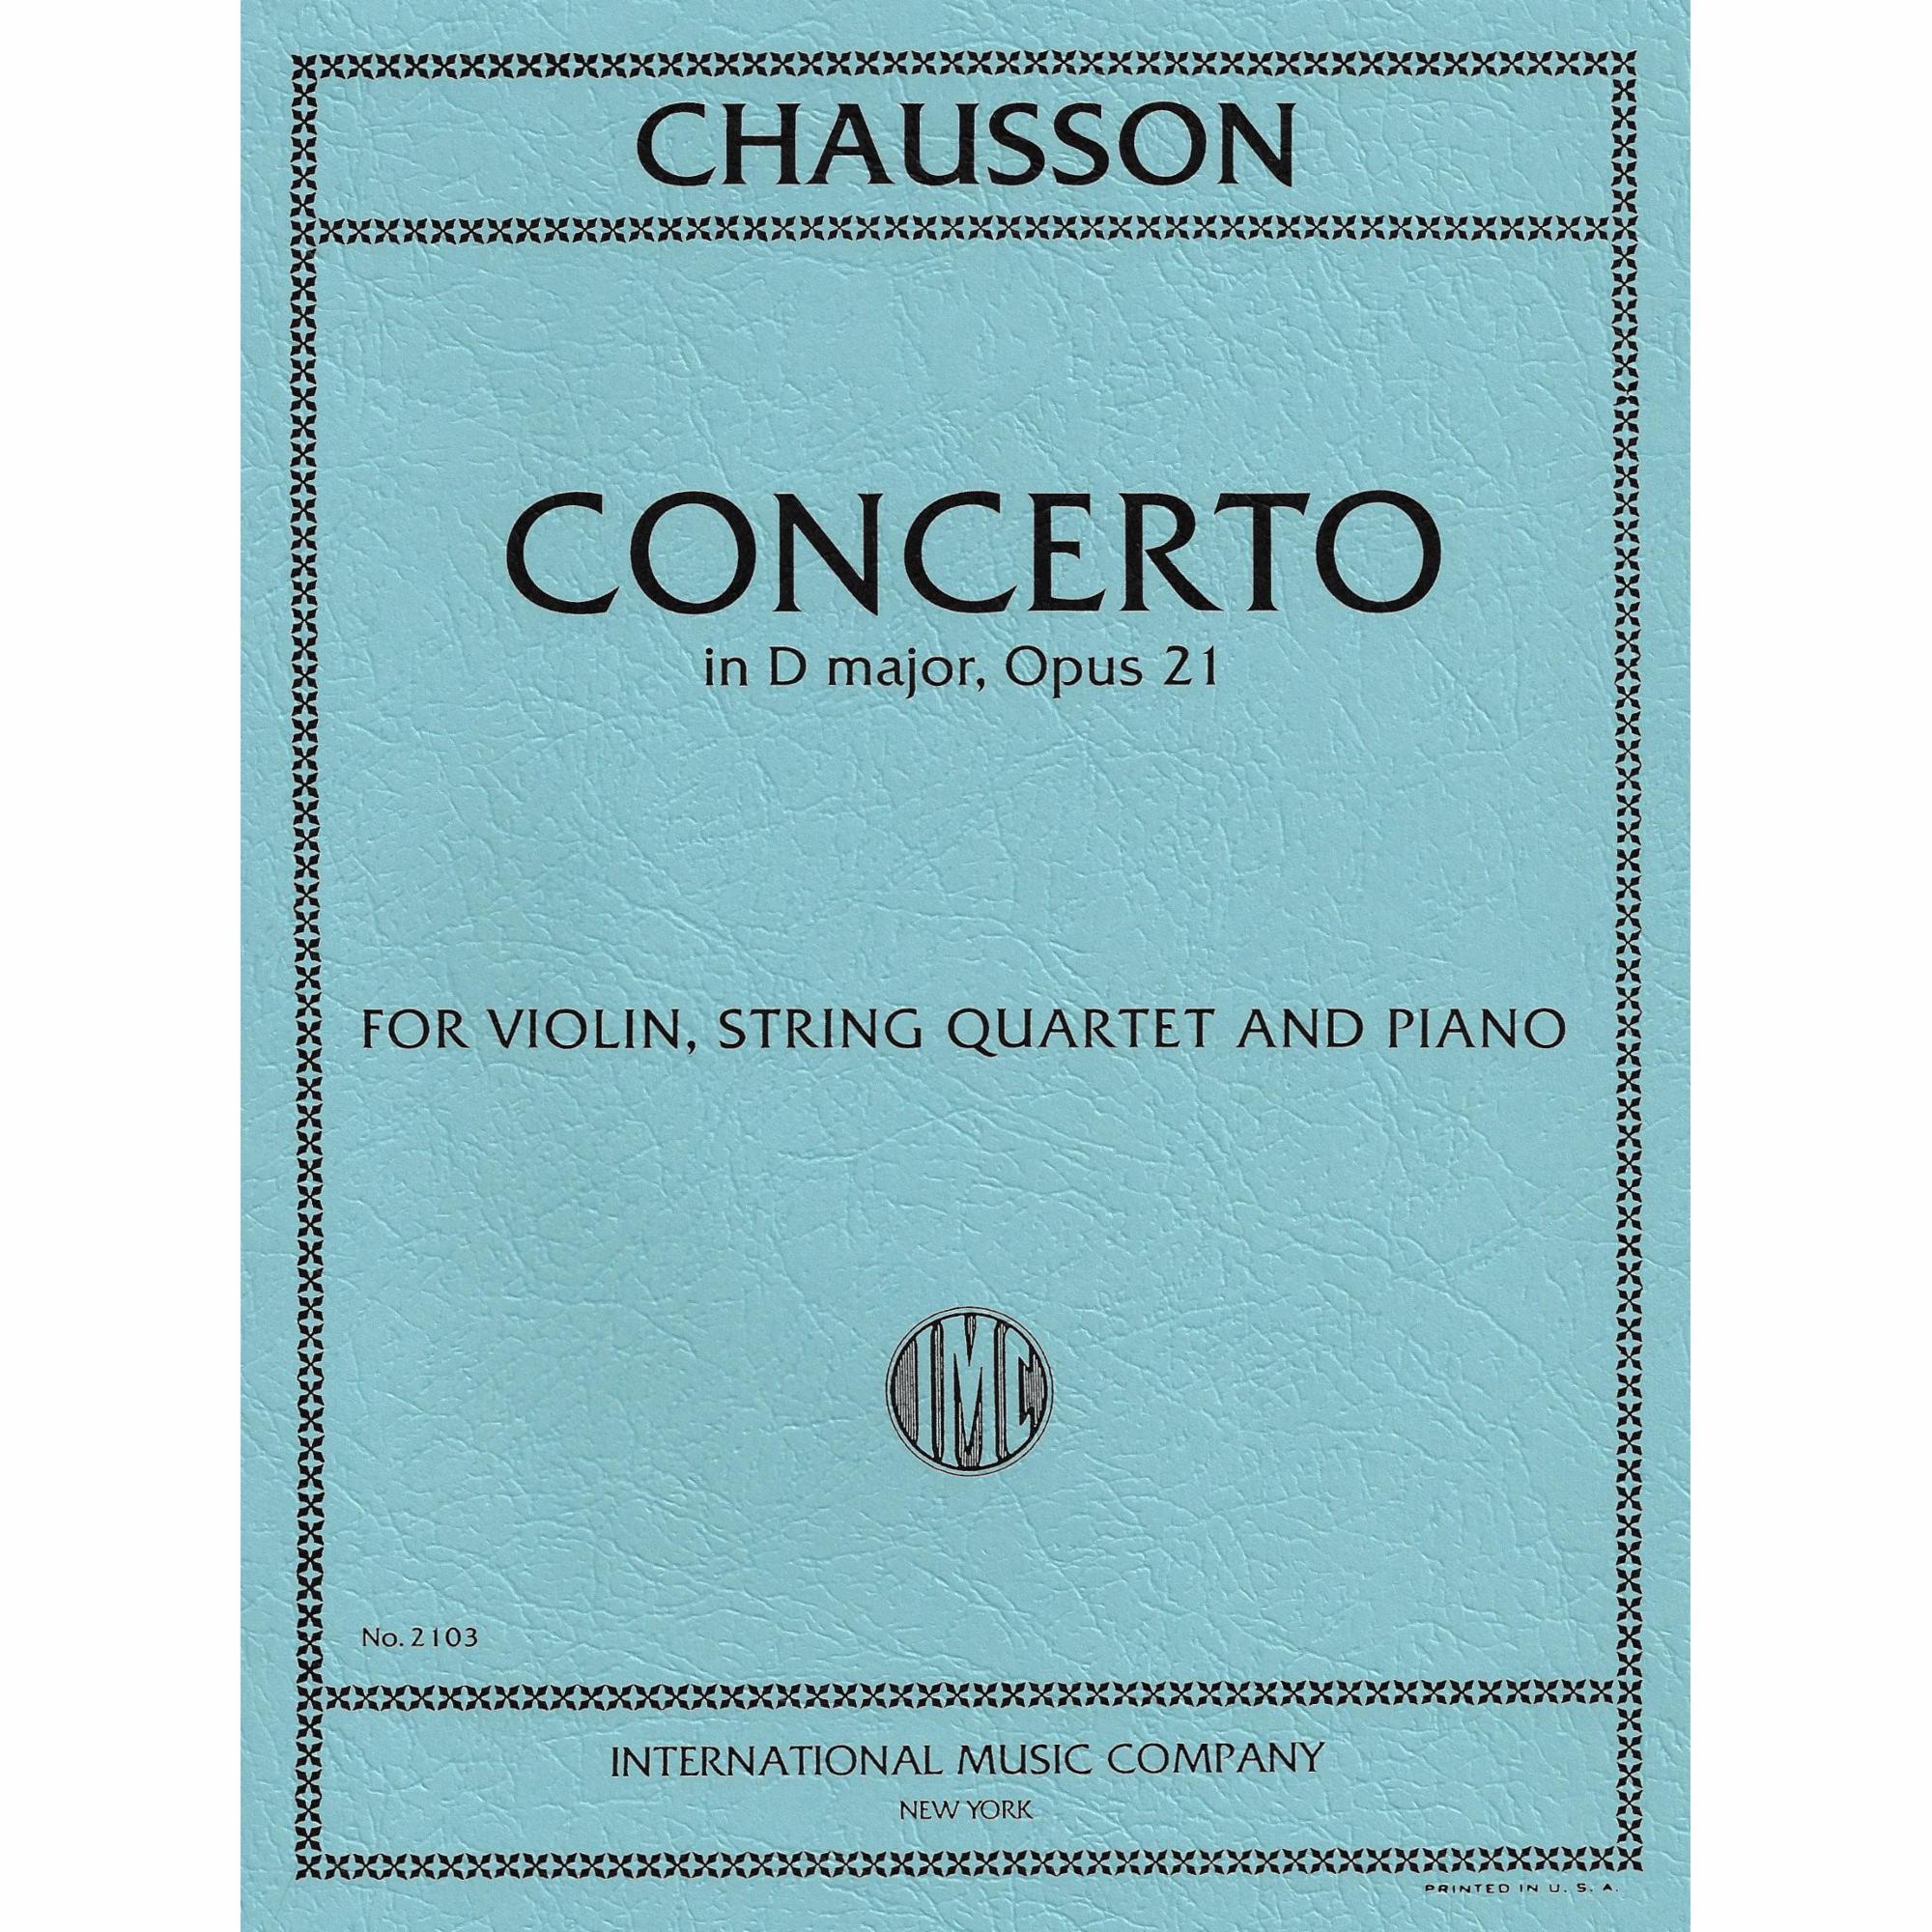 Chausson -- Concerto in D Major, Op. 21 for Violin, String Quartet, and Piano